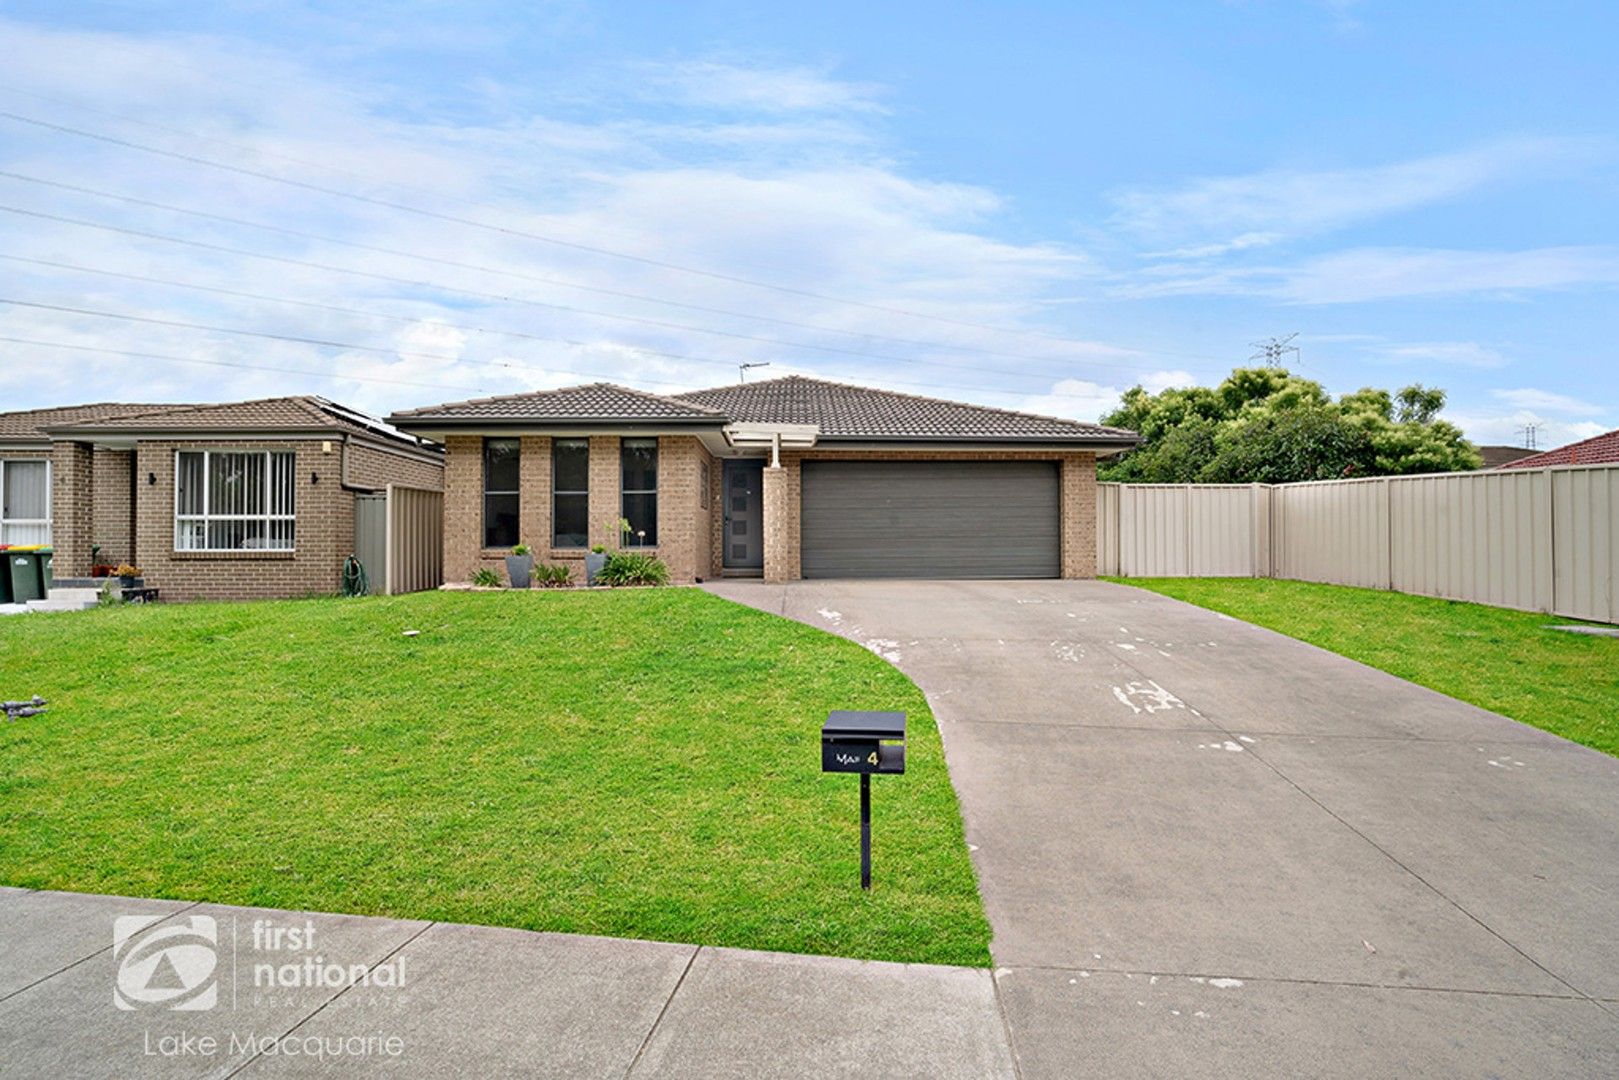 3 bedrooms House in 4 Galea Close CAMERON PARK NSW, 2285